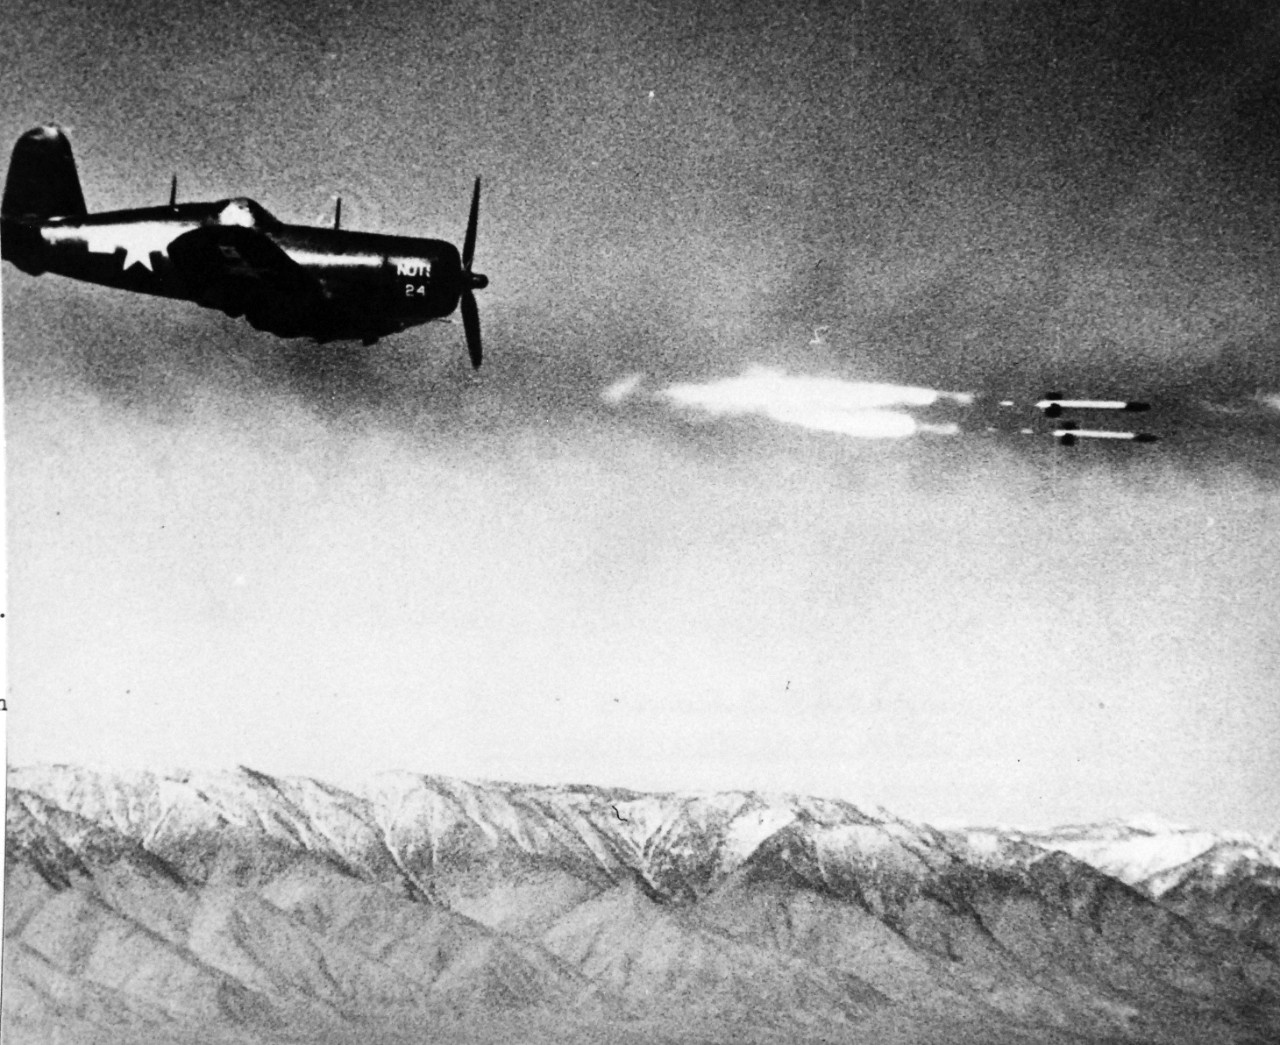 80-G-49321: Vought F4U Corsair, June 1945.   F4U loaded with rockets from Naval Ordnance Test Station, Inyokern, California, June 5, 1945.  Shown:  Rockets being fired from aircraft.    Official U.S. Navy Photograph, now in the collections of the National Archives.  